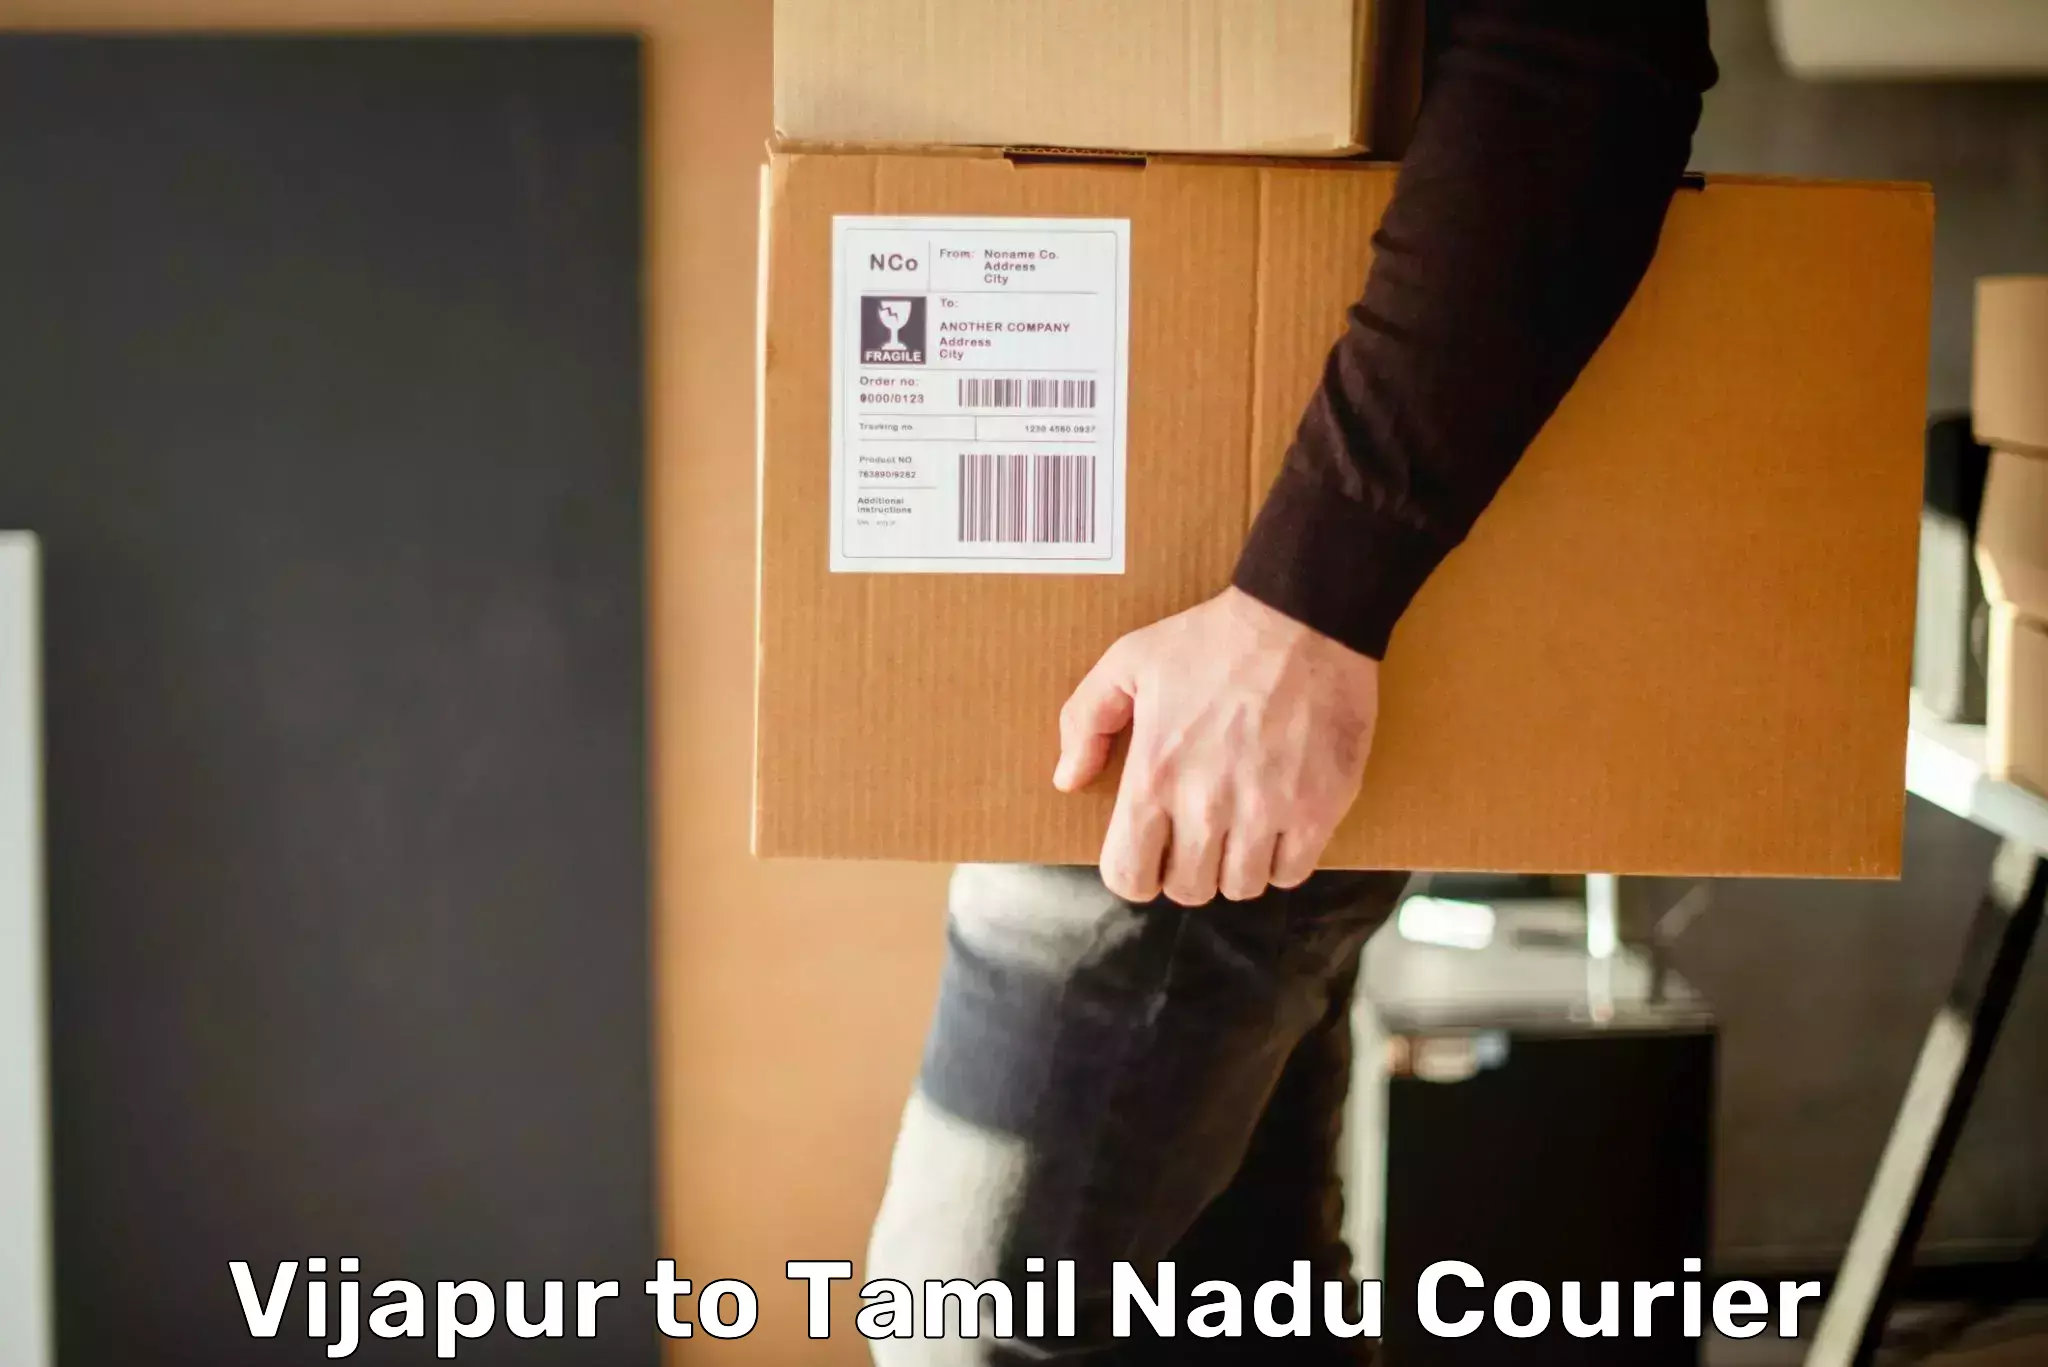 Large-scale shipping solutions Vijapur to Tamil Nadu